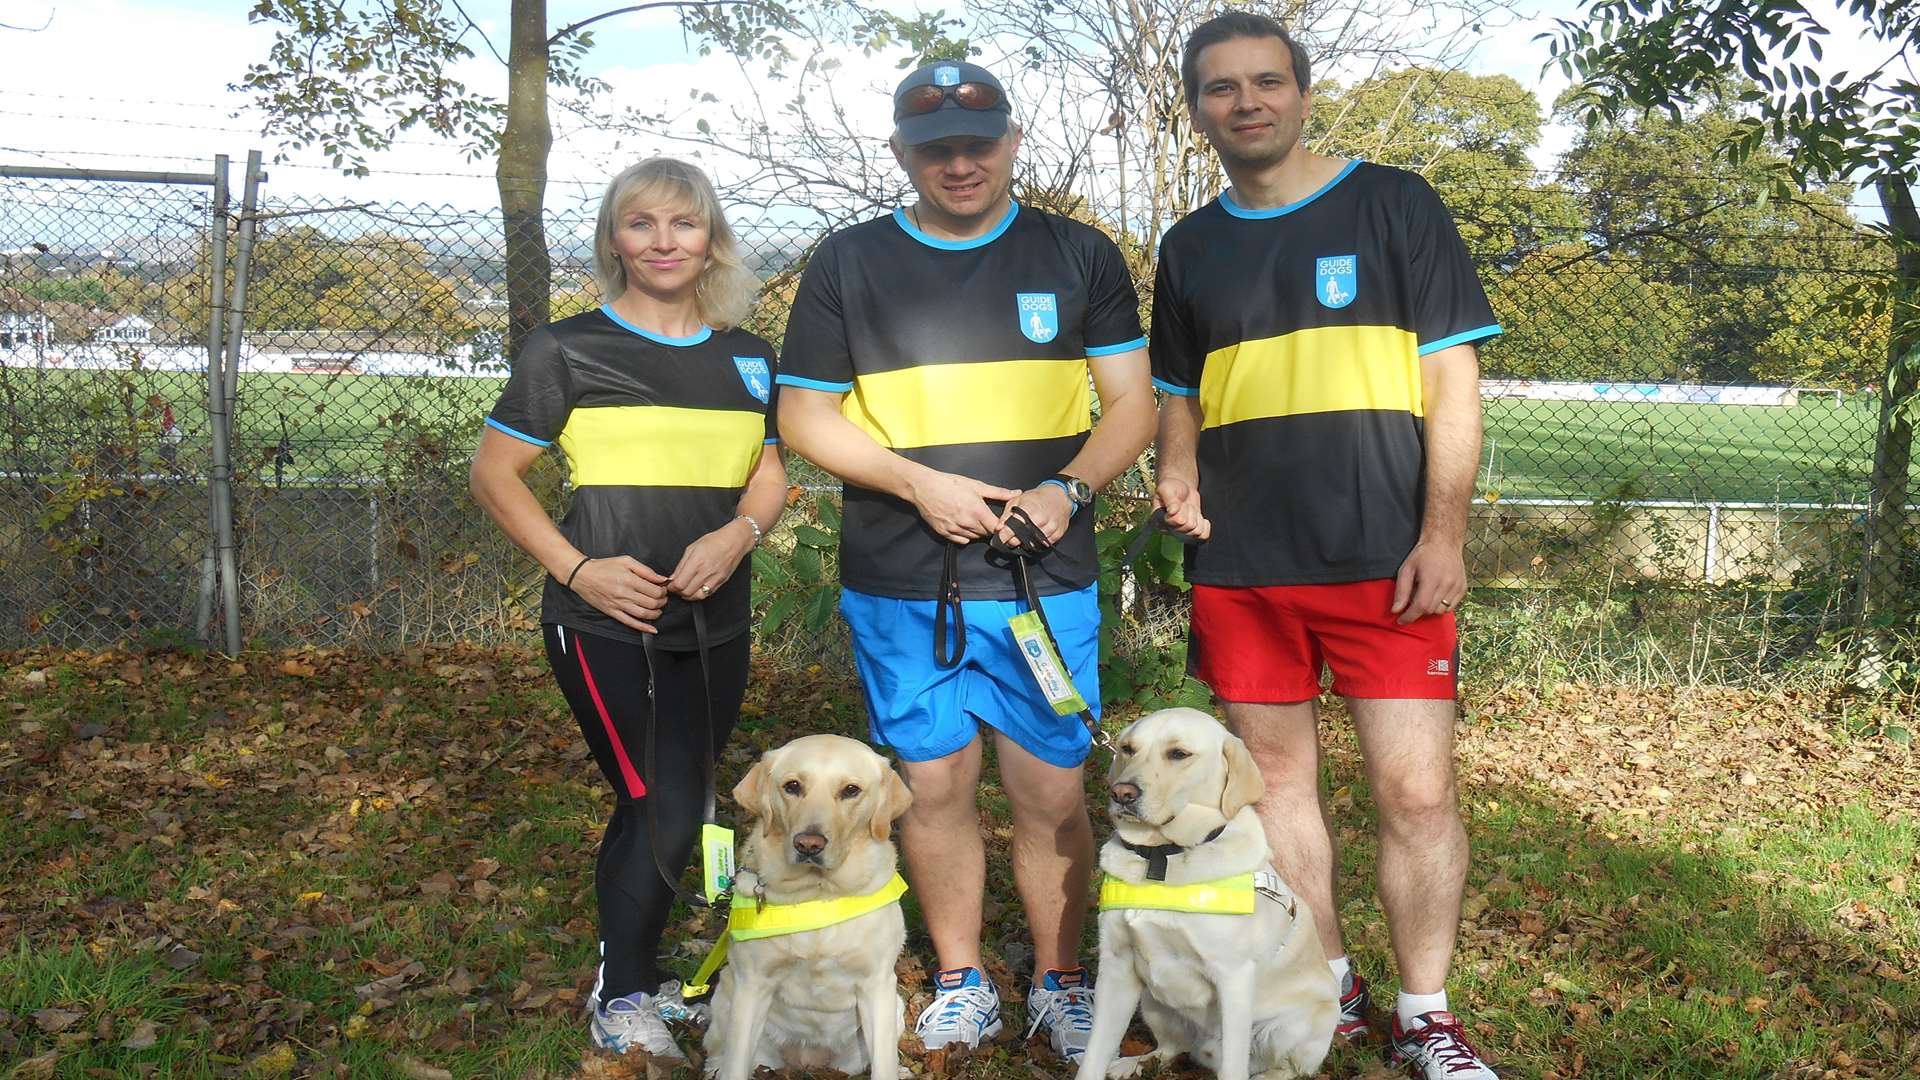 Marathon runners Clare Wilson, Paul Smith, Lee Wilson and guide dogs Zara and Pedro